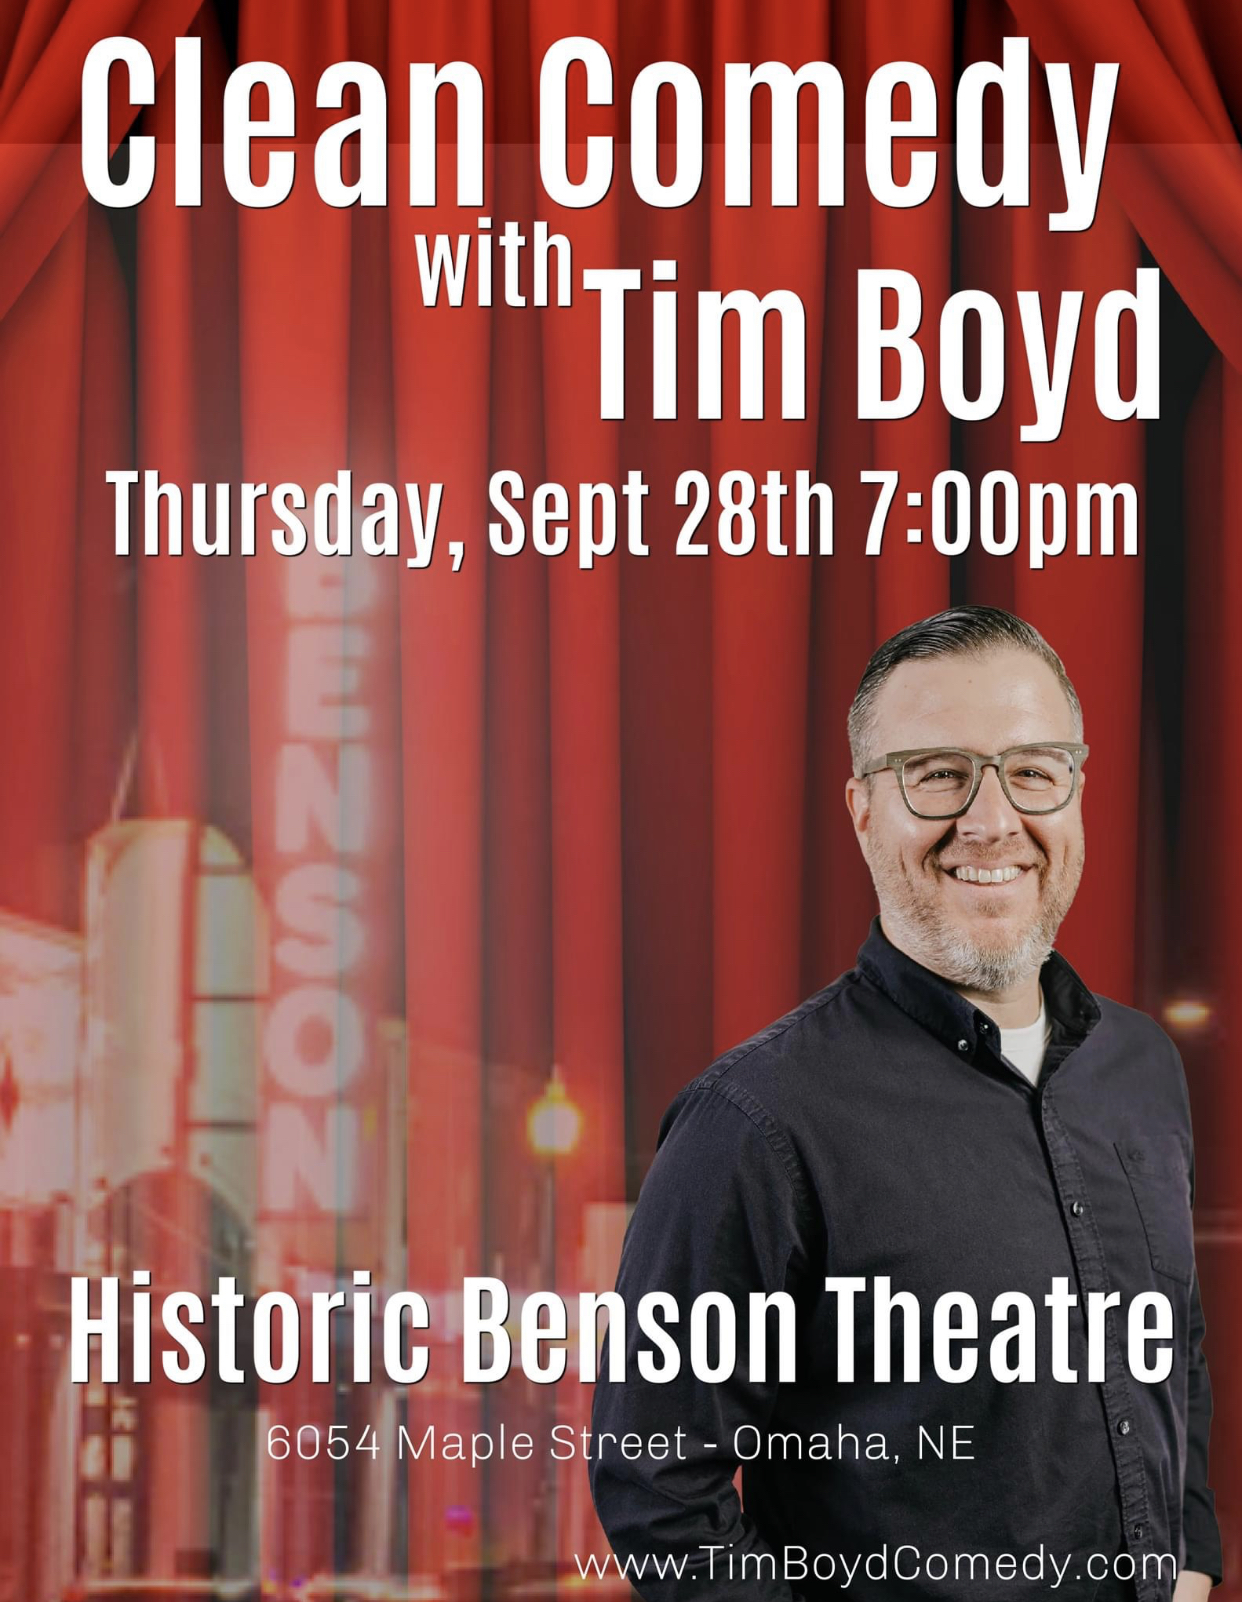 Clean Comedy with Tim Boyd